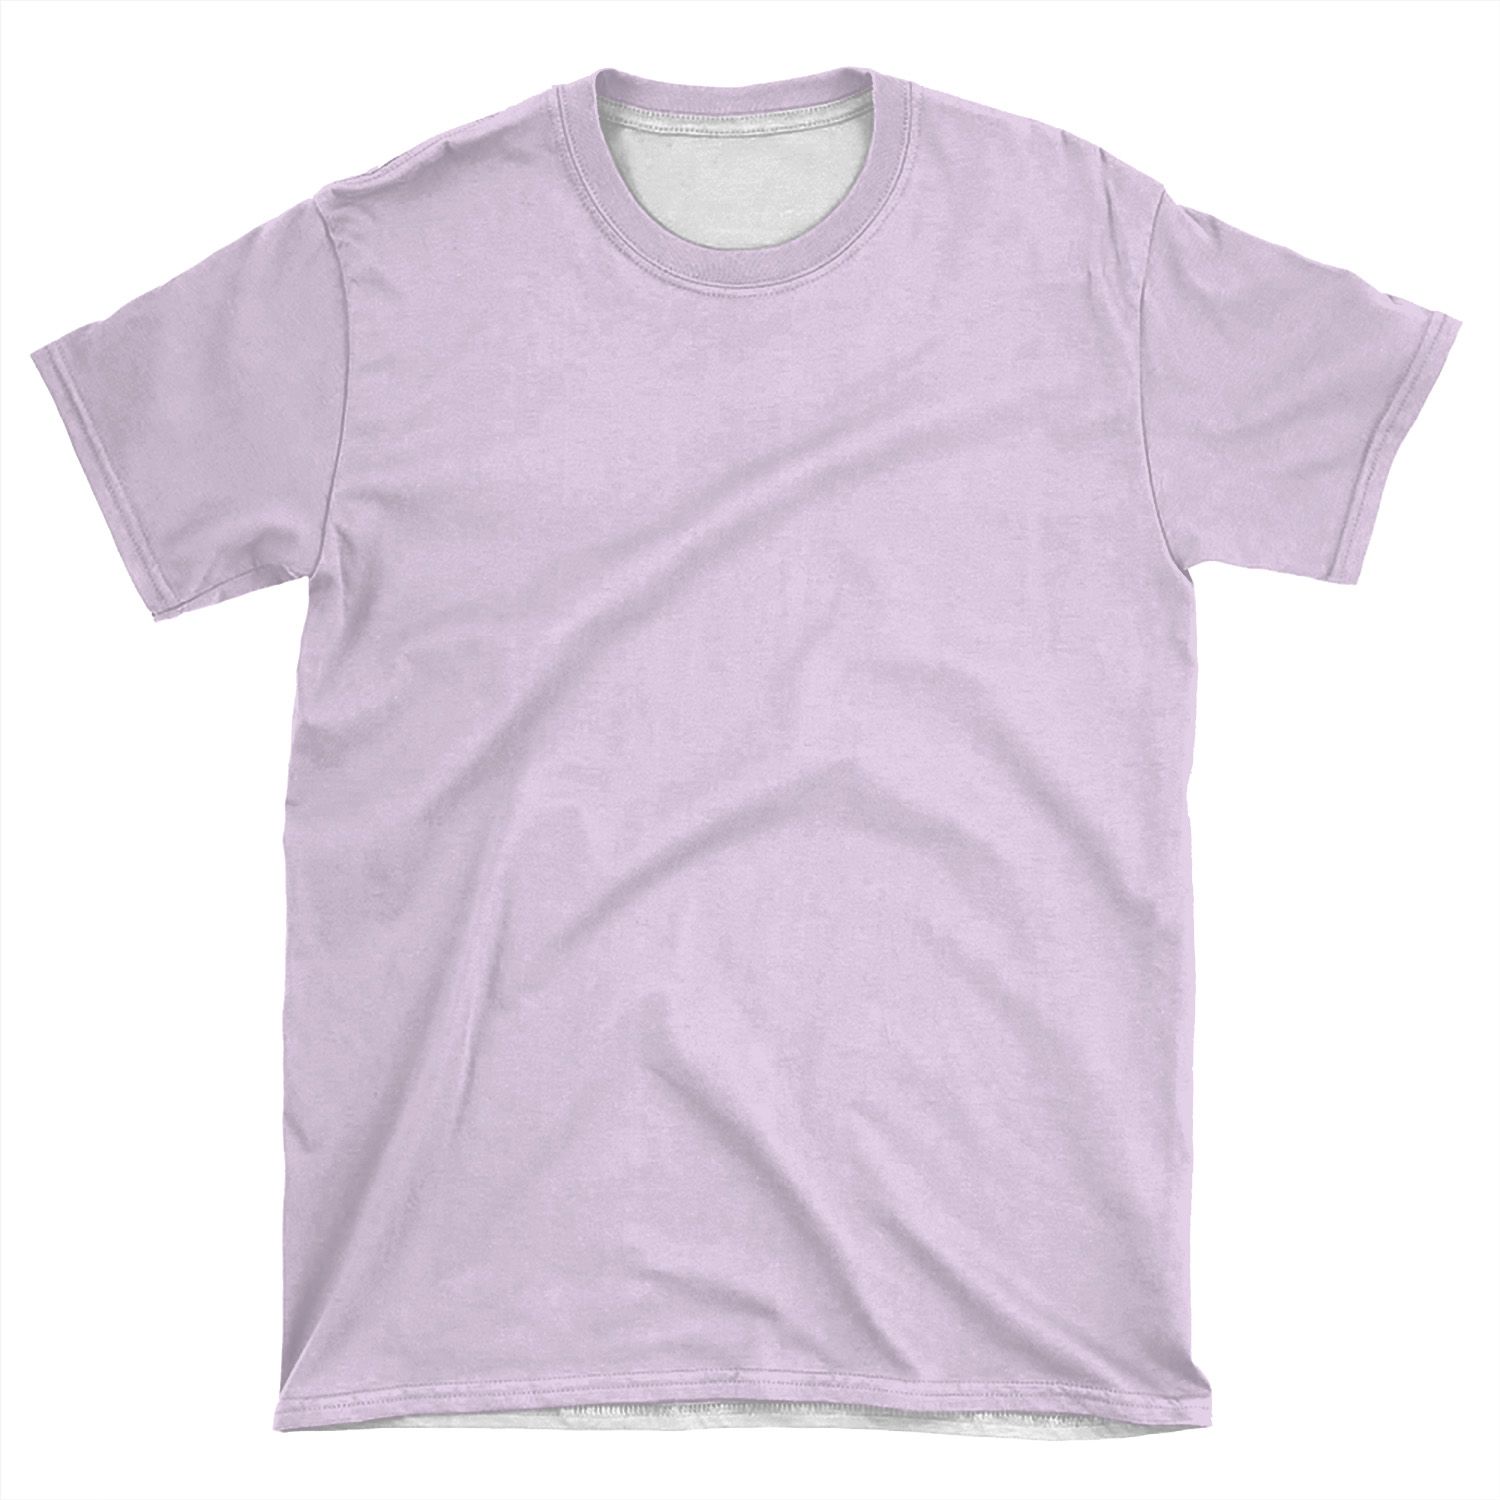 Pale Lilac Solid Color AOP T-shirt Tee - Chief T-shirt